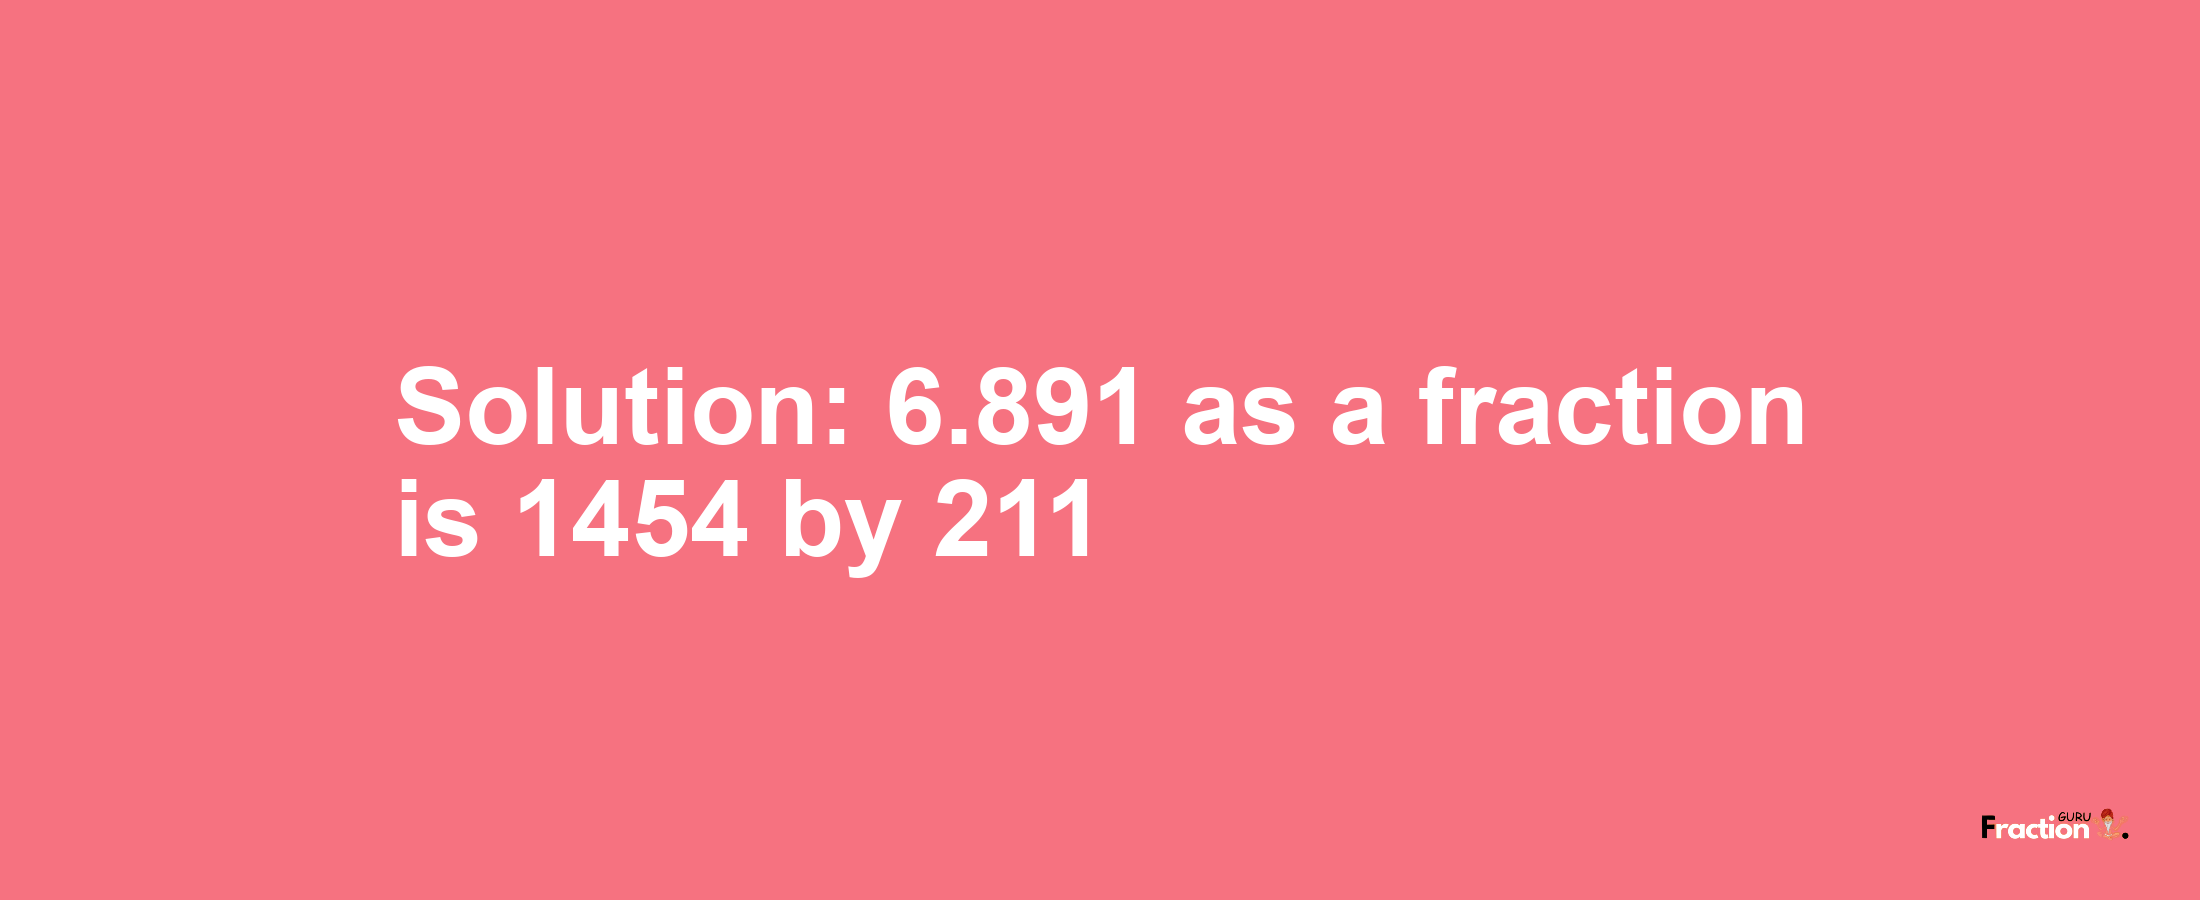 Solution:6.891 as a fraction is 1454/211